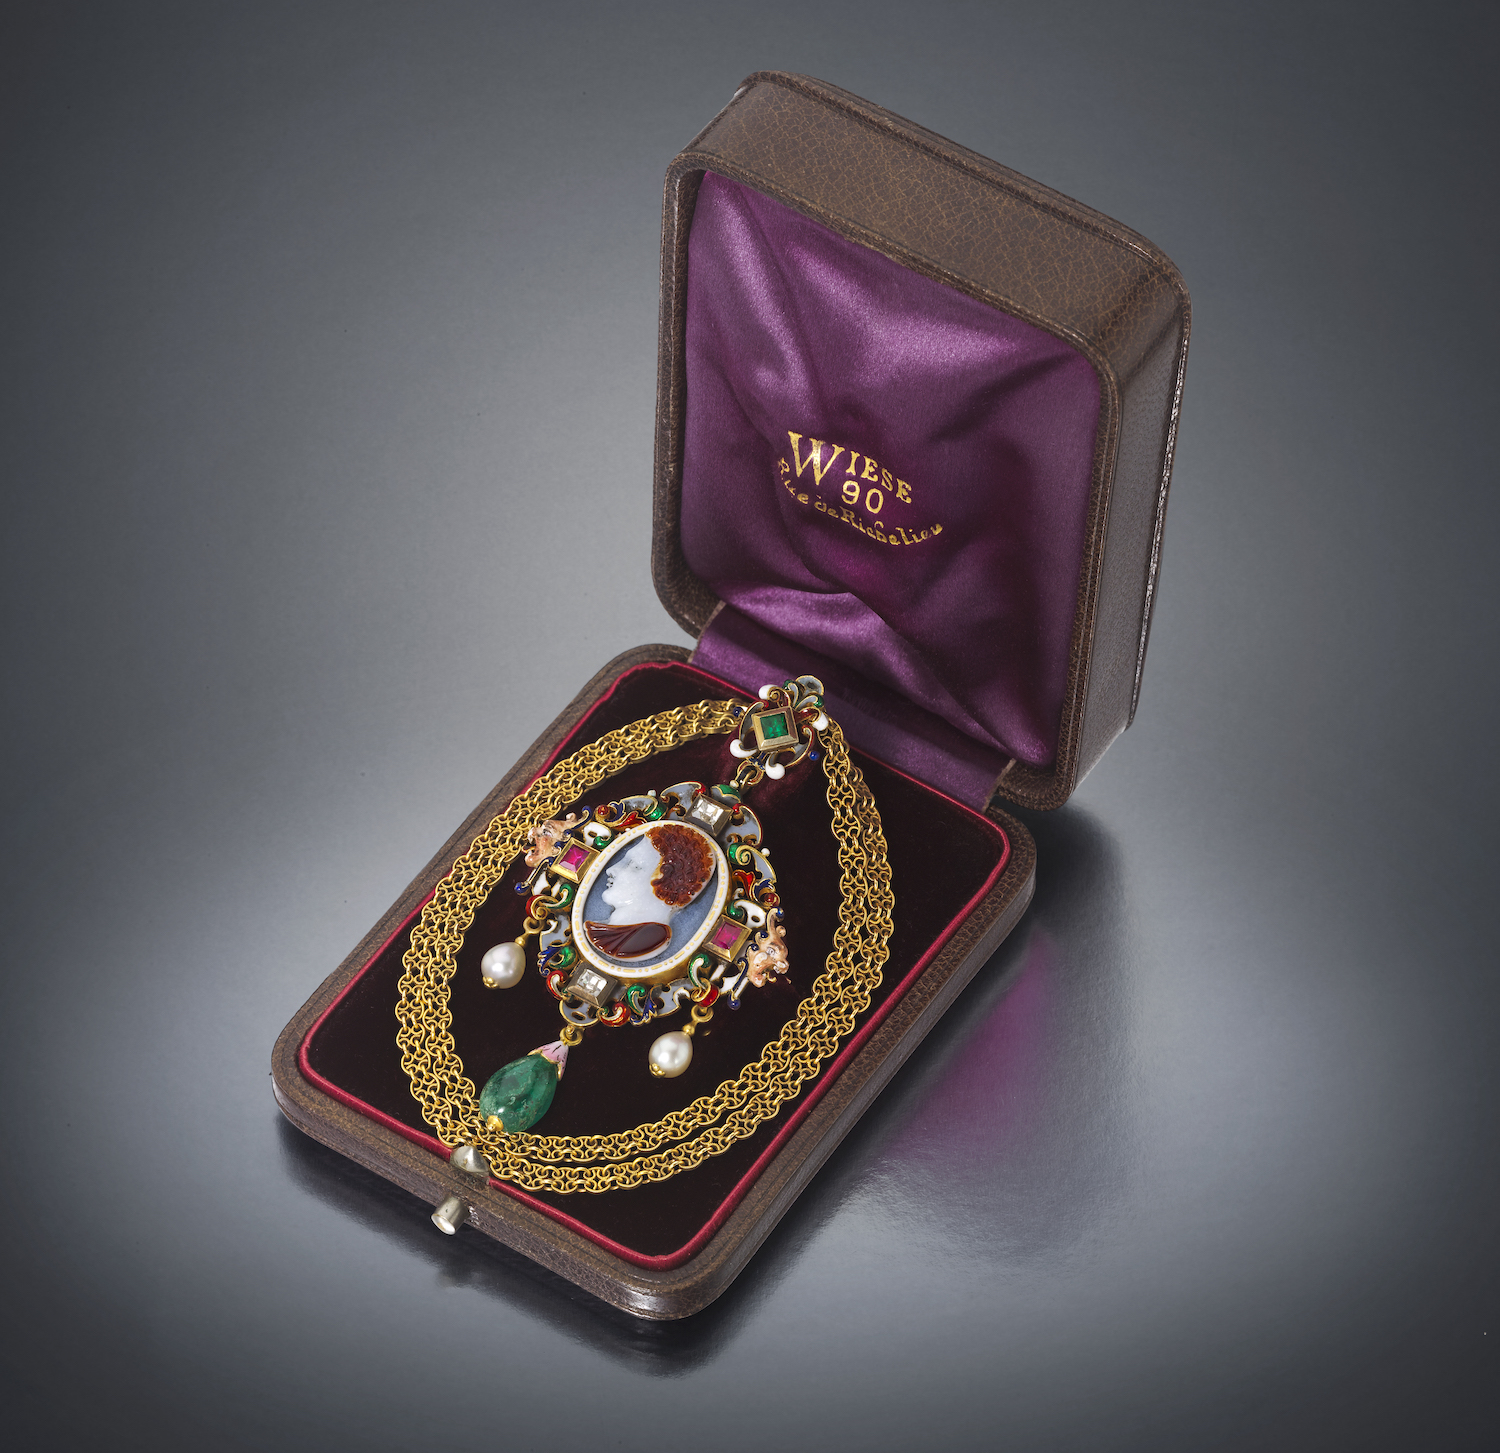 Jules Wiese (1818-1895) / Louis Wiese (son of Jules, 1852-1923) Renaissance Revival jeweled and enameled 18k gold pendant necklace set with an ancient carved carnelian cameo, table cut diamonds, rubies and an emerald, two natural pearl drops and a cabochon emerald drop with the original chain, signed, original leather box with and silk velvet and satin interior, c.1875